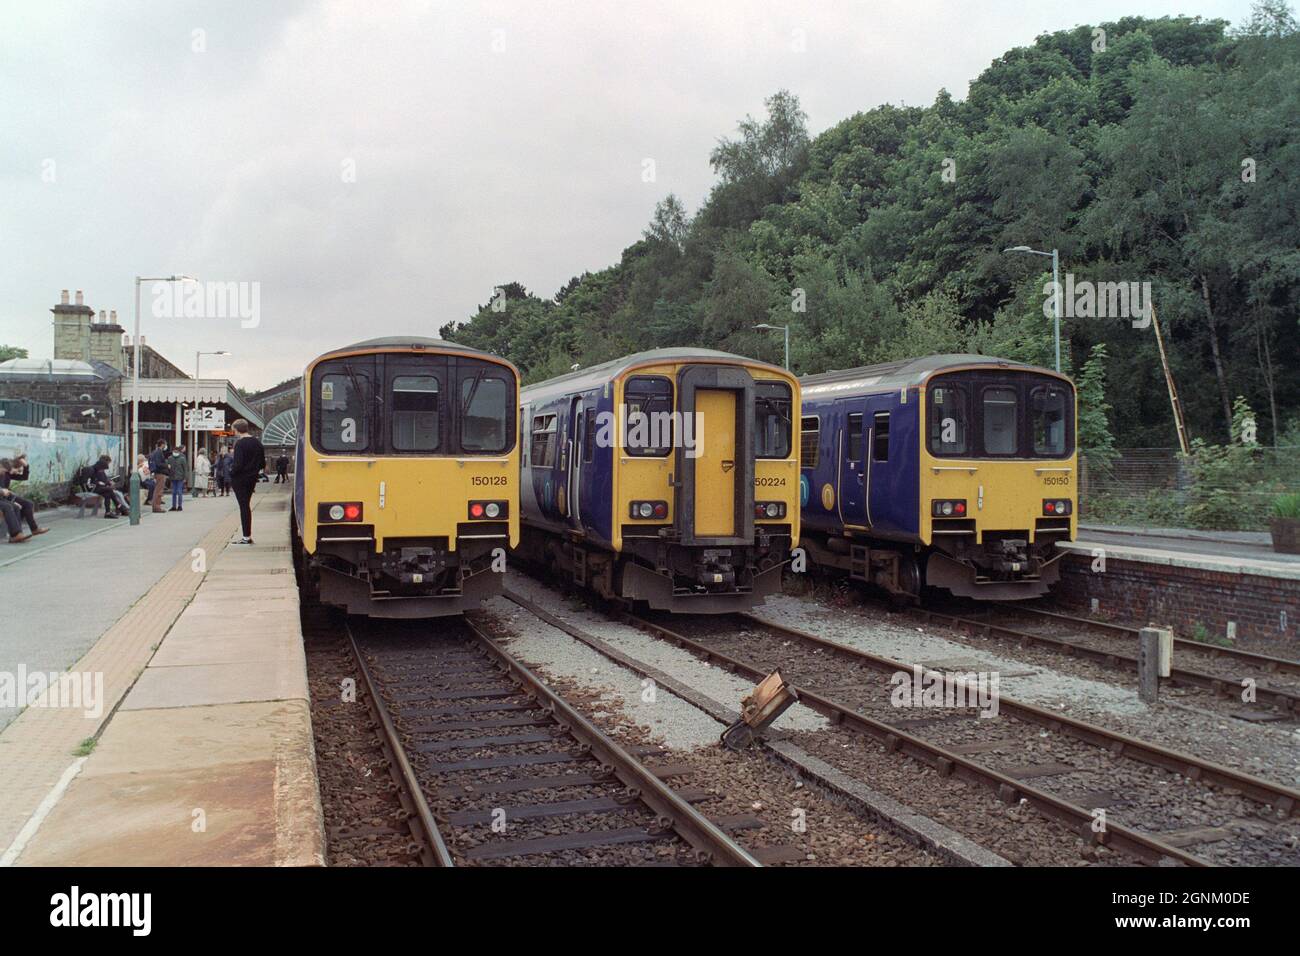 Buxton, UK - 4 September 2021: Three trains (Class 150) operated by Northern at Buxton station for local services. Stock Photo